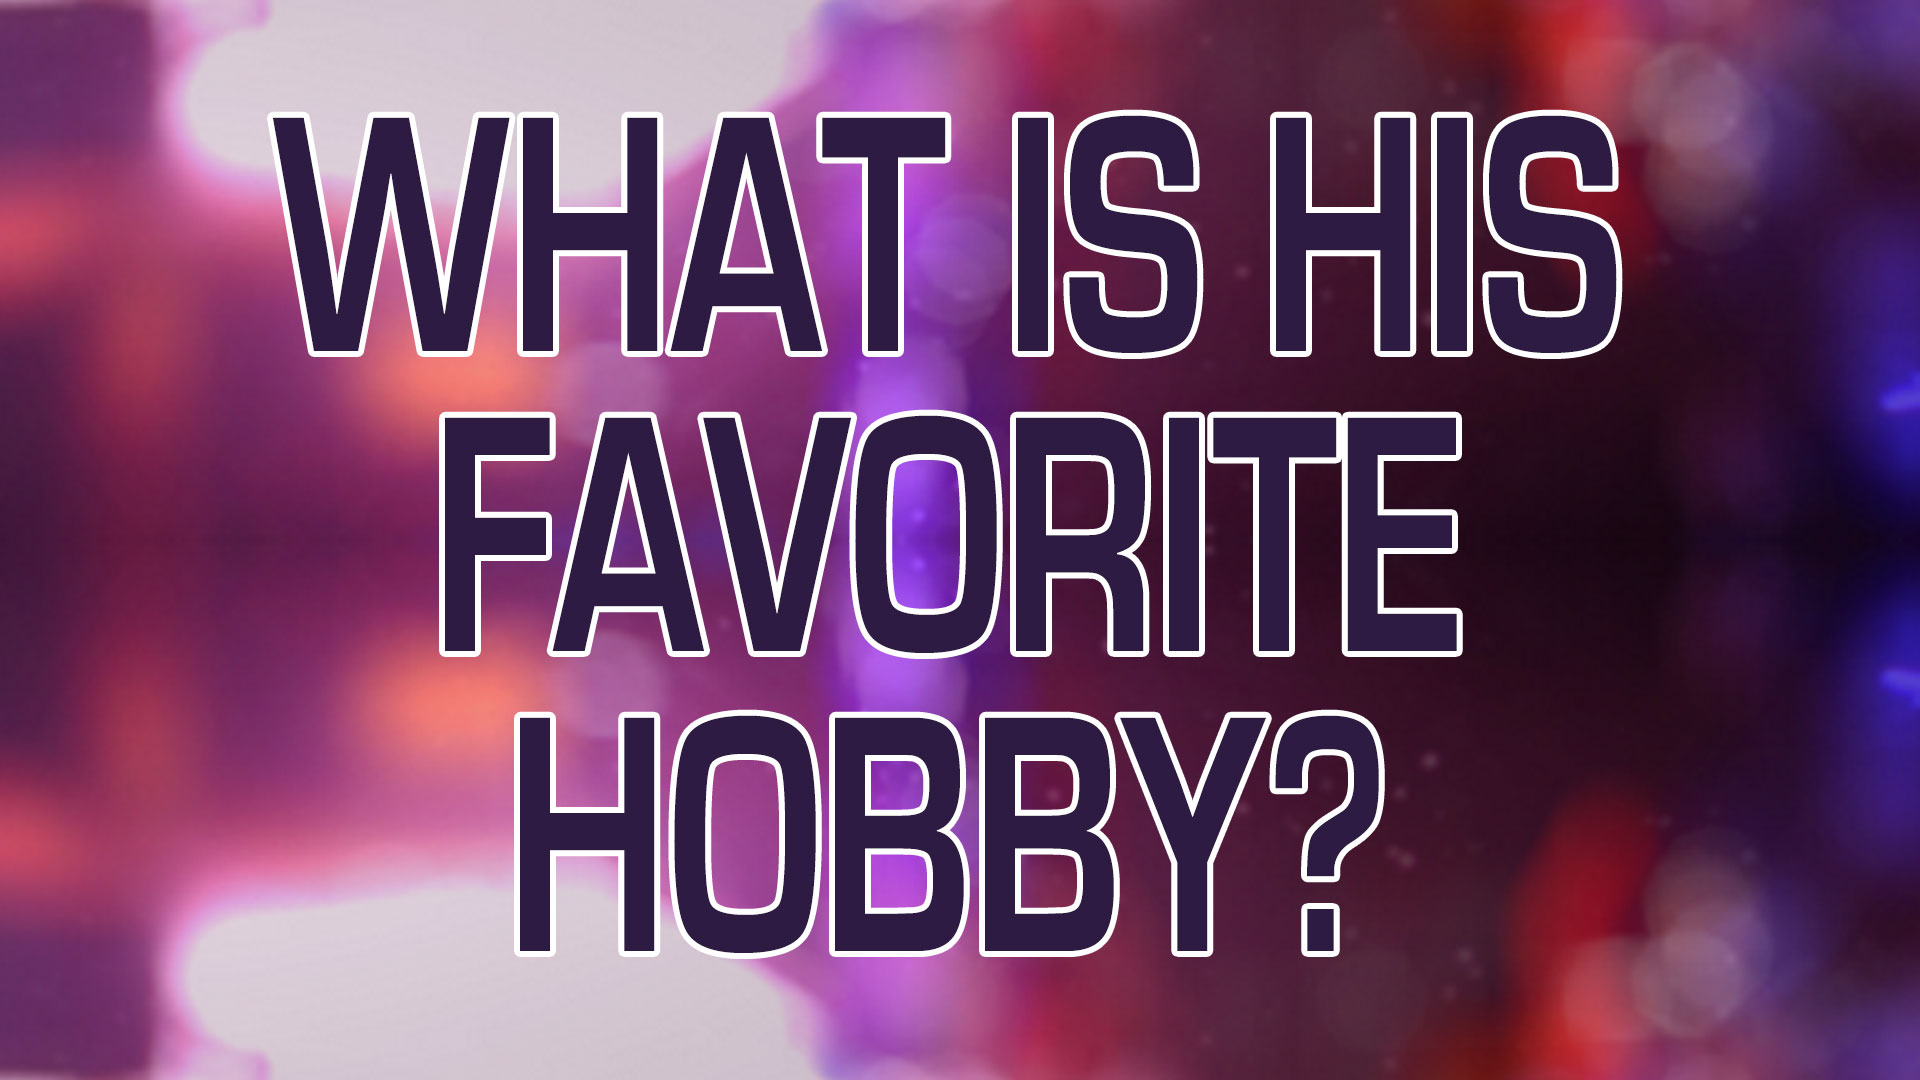 What is his favorite hobby?